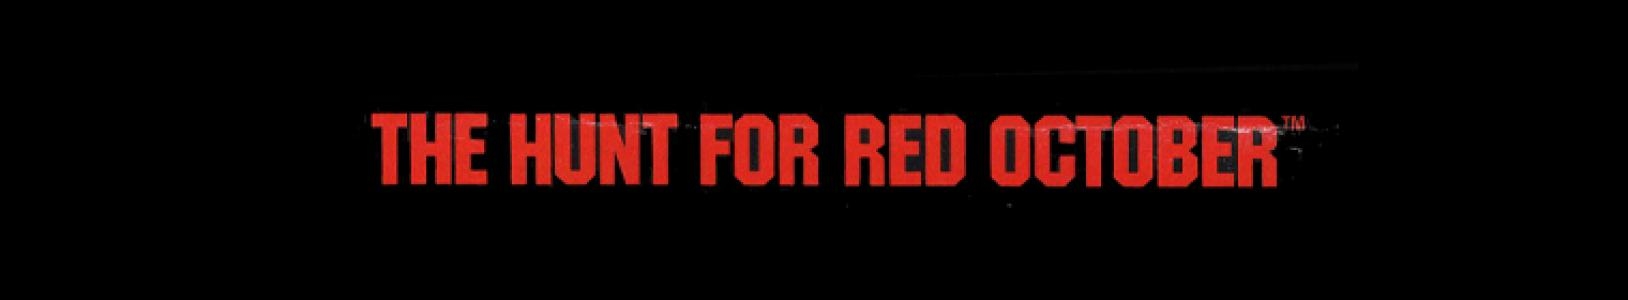 The Hunt for Red October banner